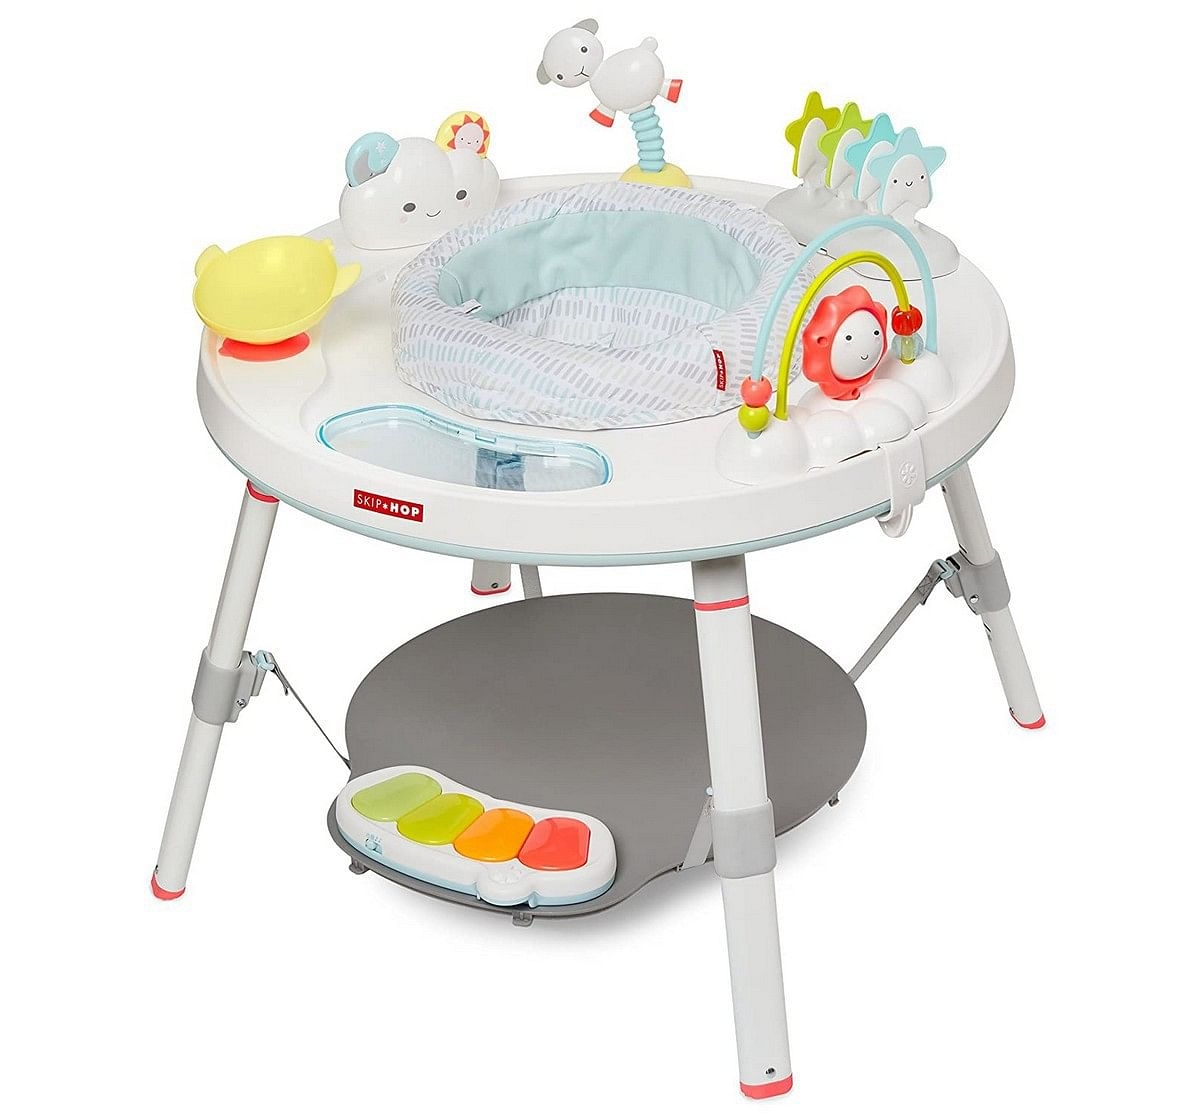 Skip Hop Silver Lining Cloud activity center 3-stage Plastic playtable White 4M+